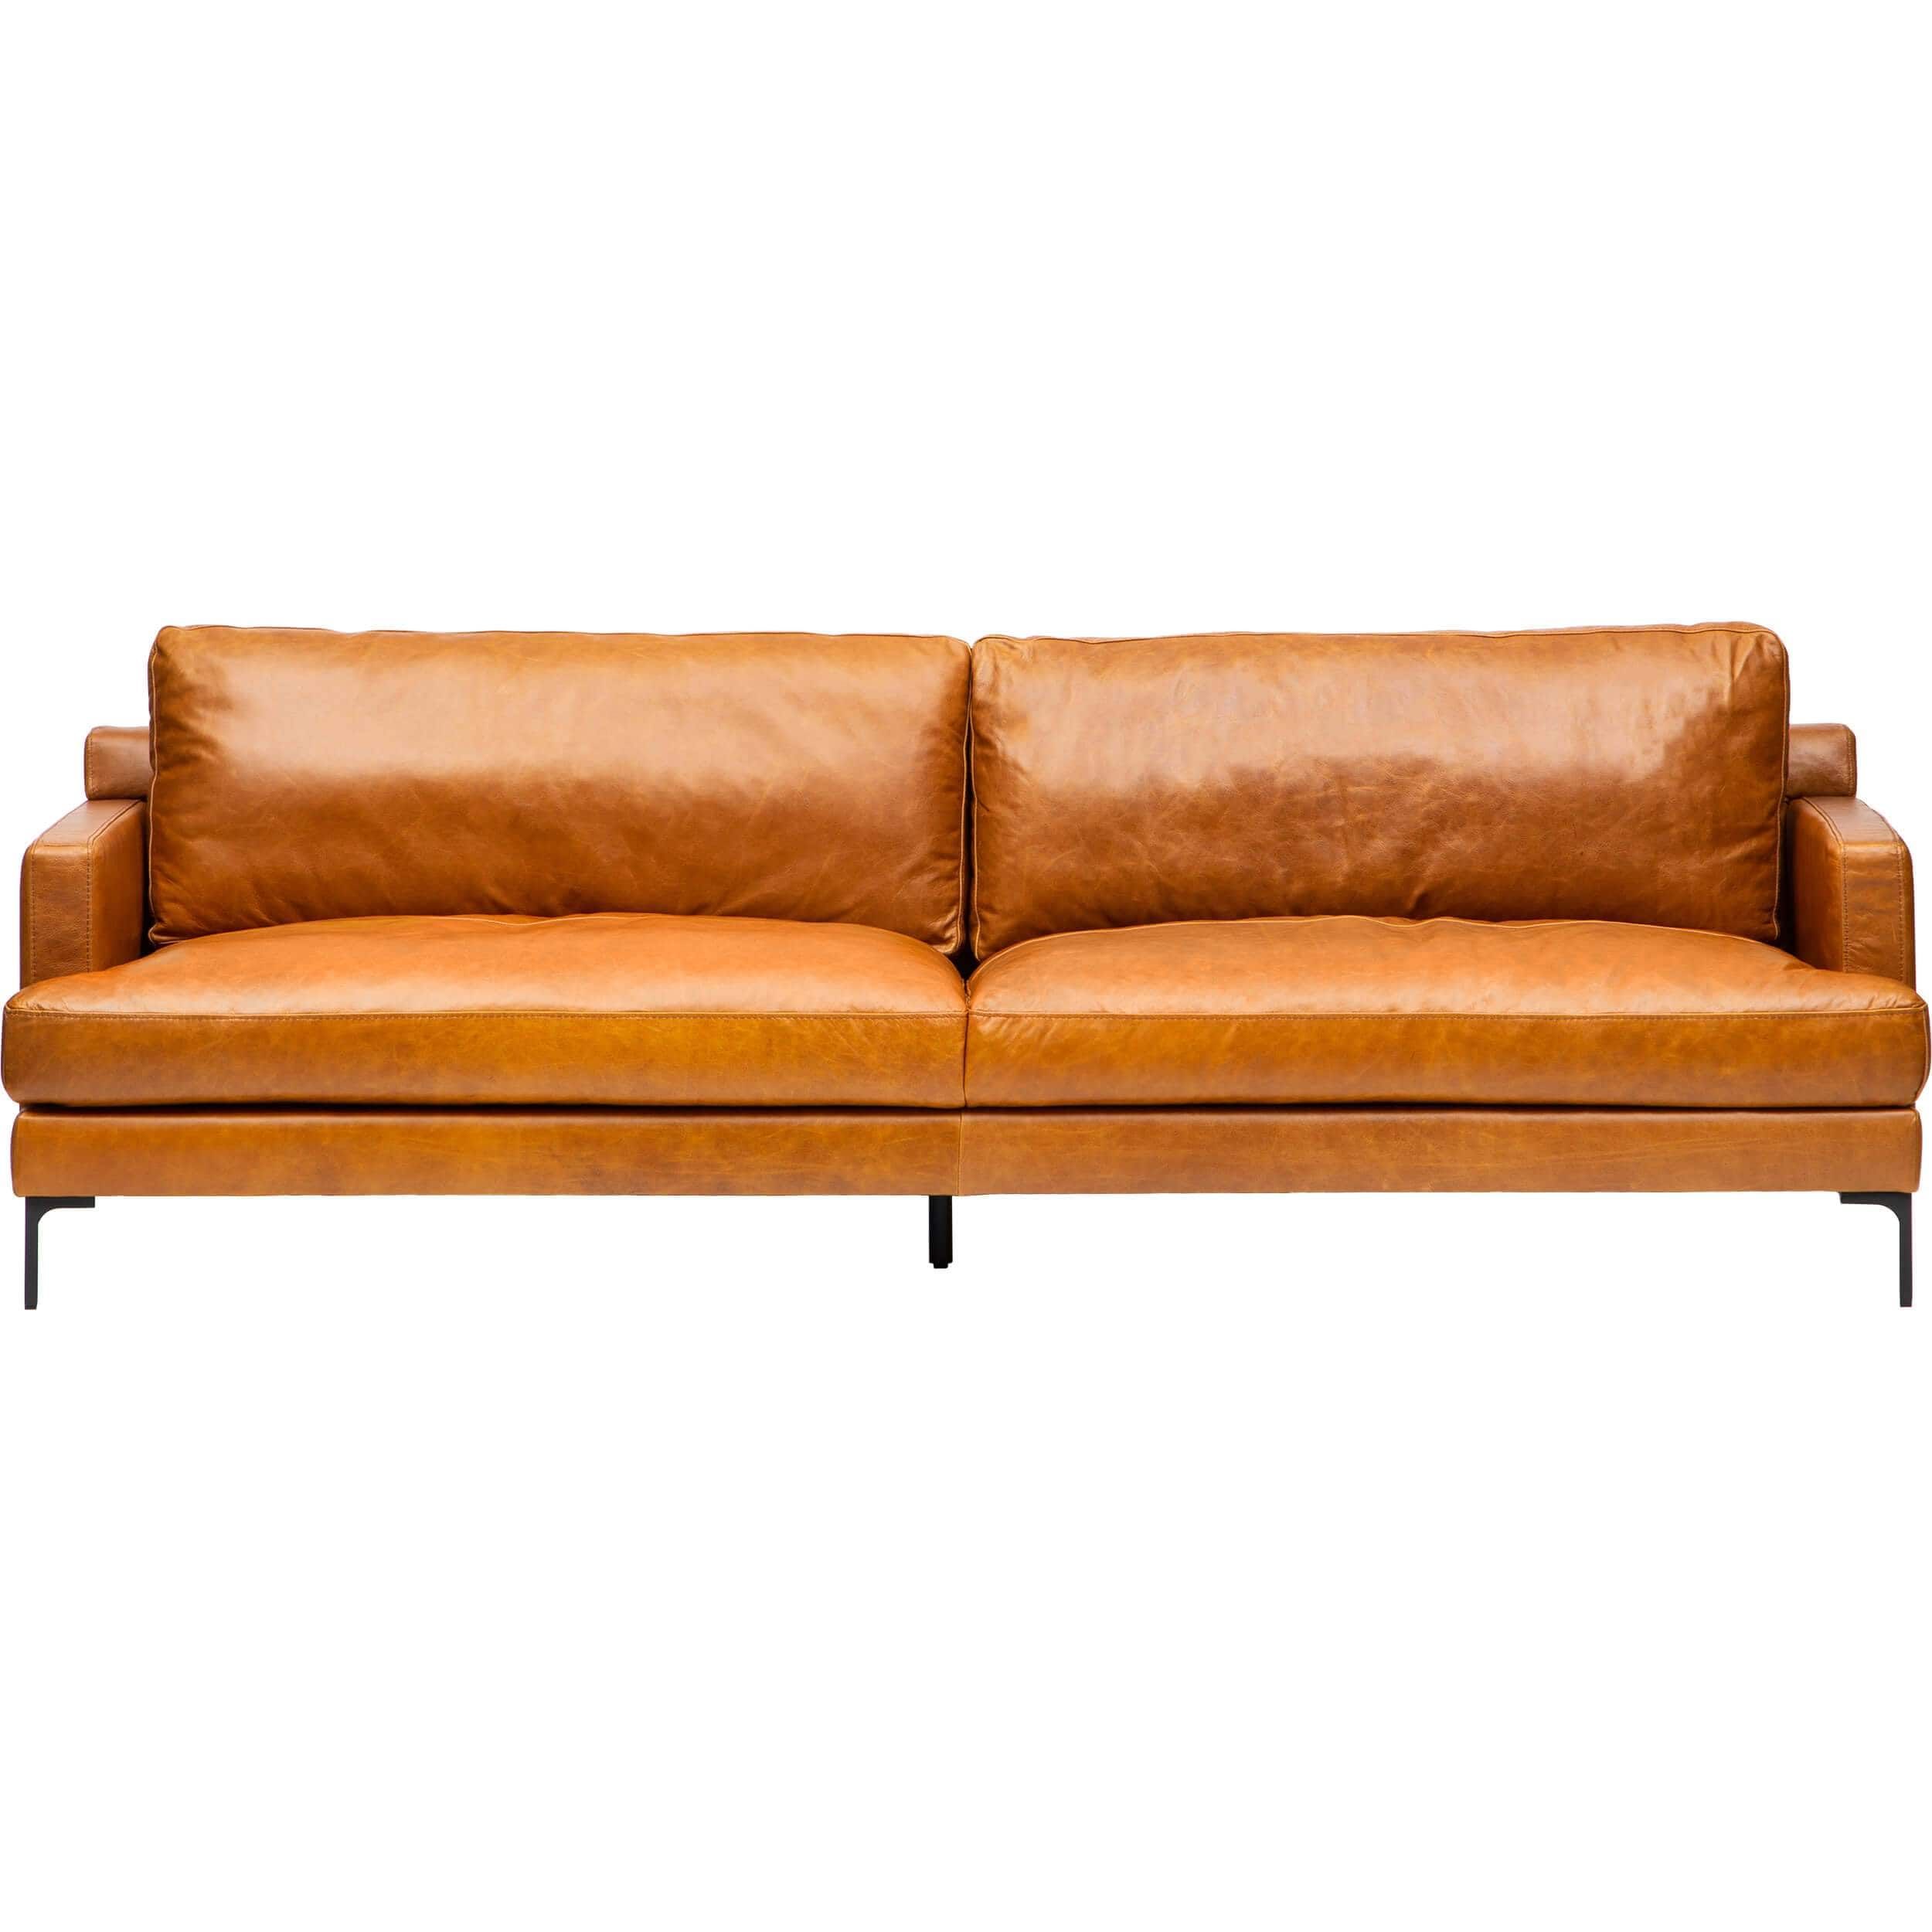 Choosing the Perfect Contemporary Leather
Sofa for Your Space